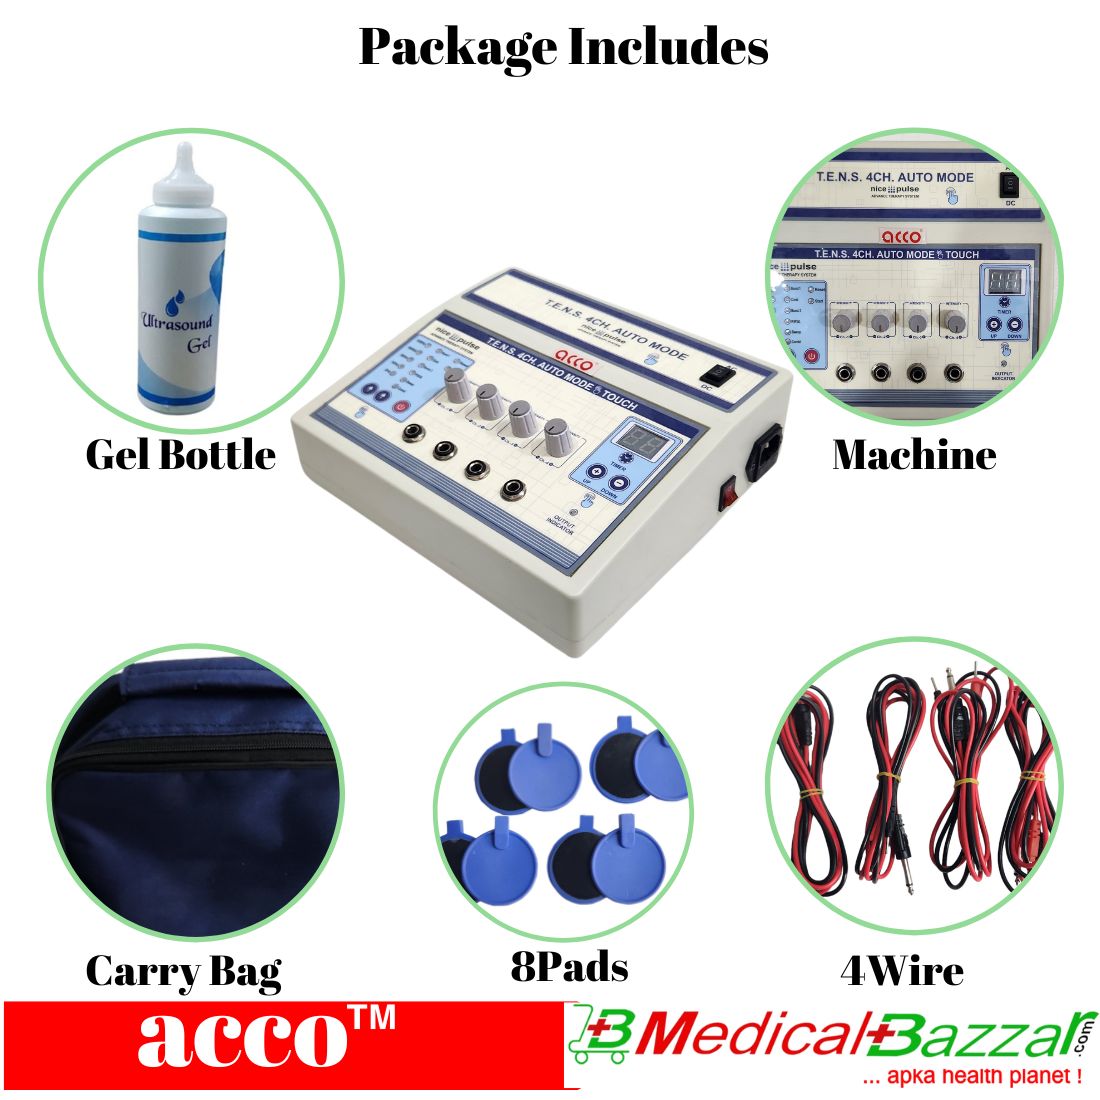 acco Tens Machine (with 3 Hrs Battery Backup & Touch Buttons)